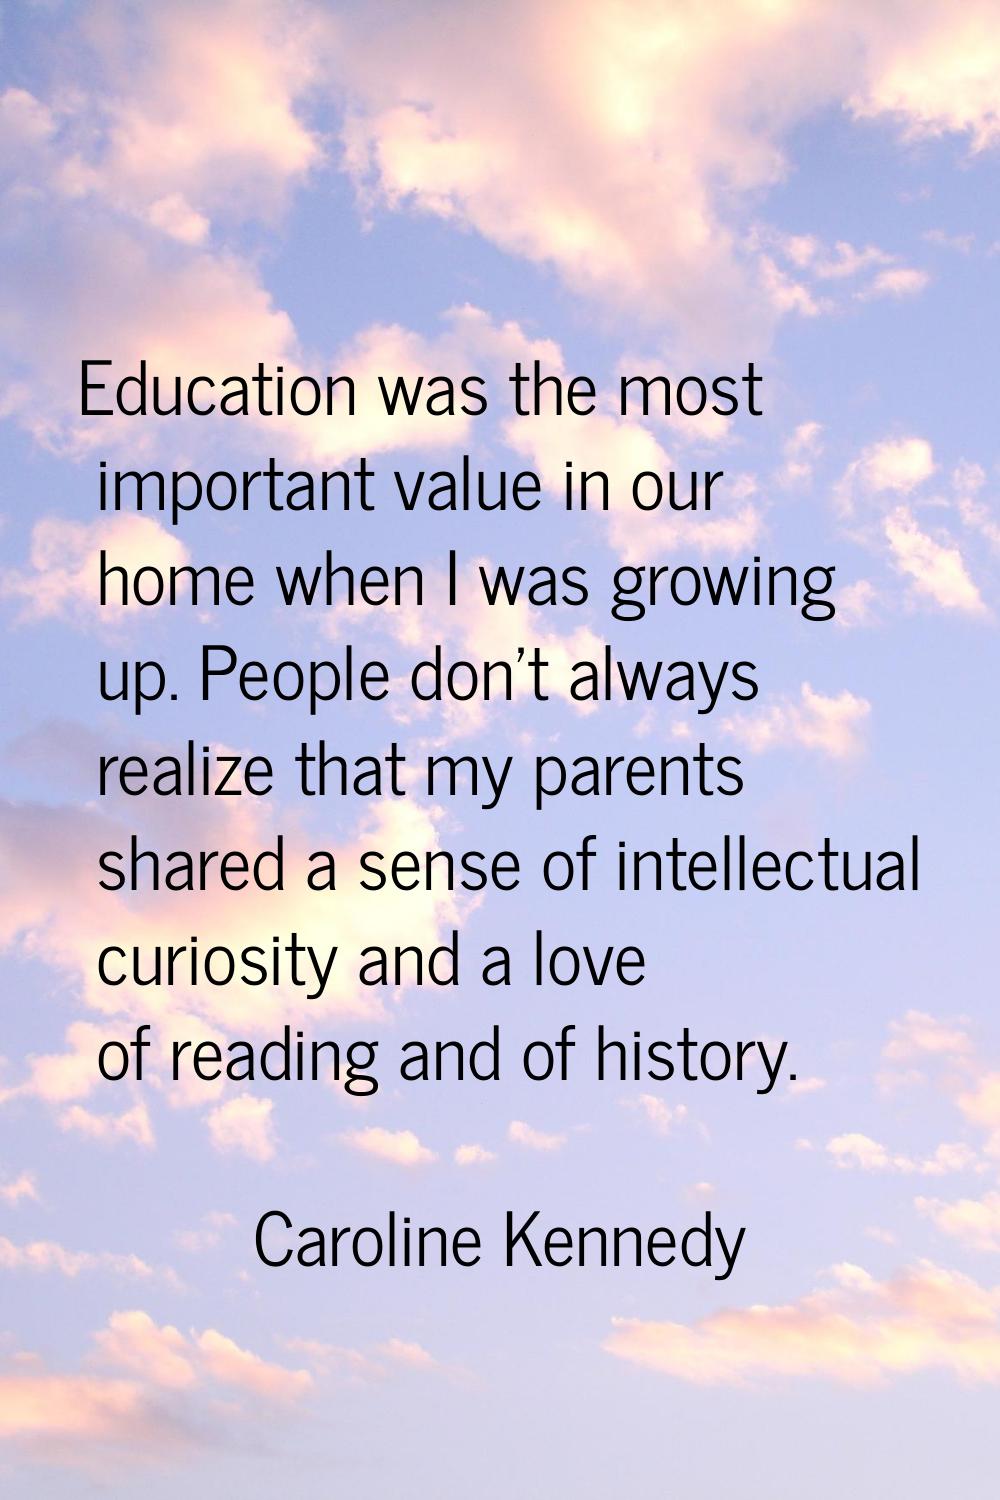 Education was the most important value in our home when I was growing up. People don't always reali